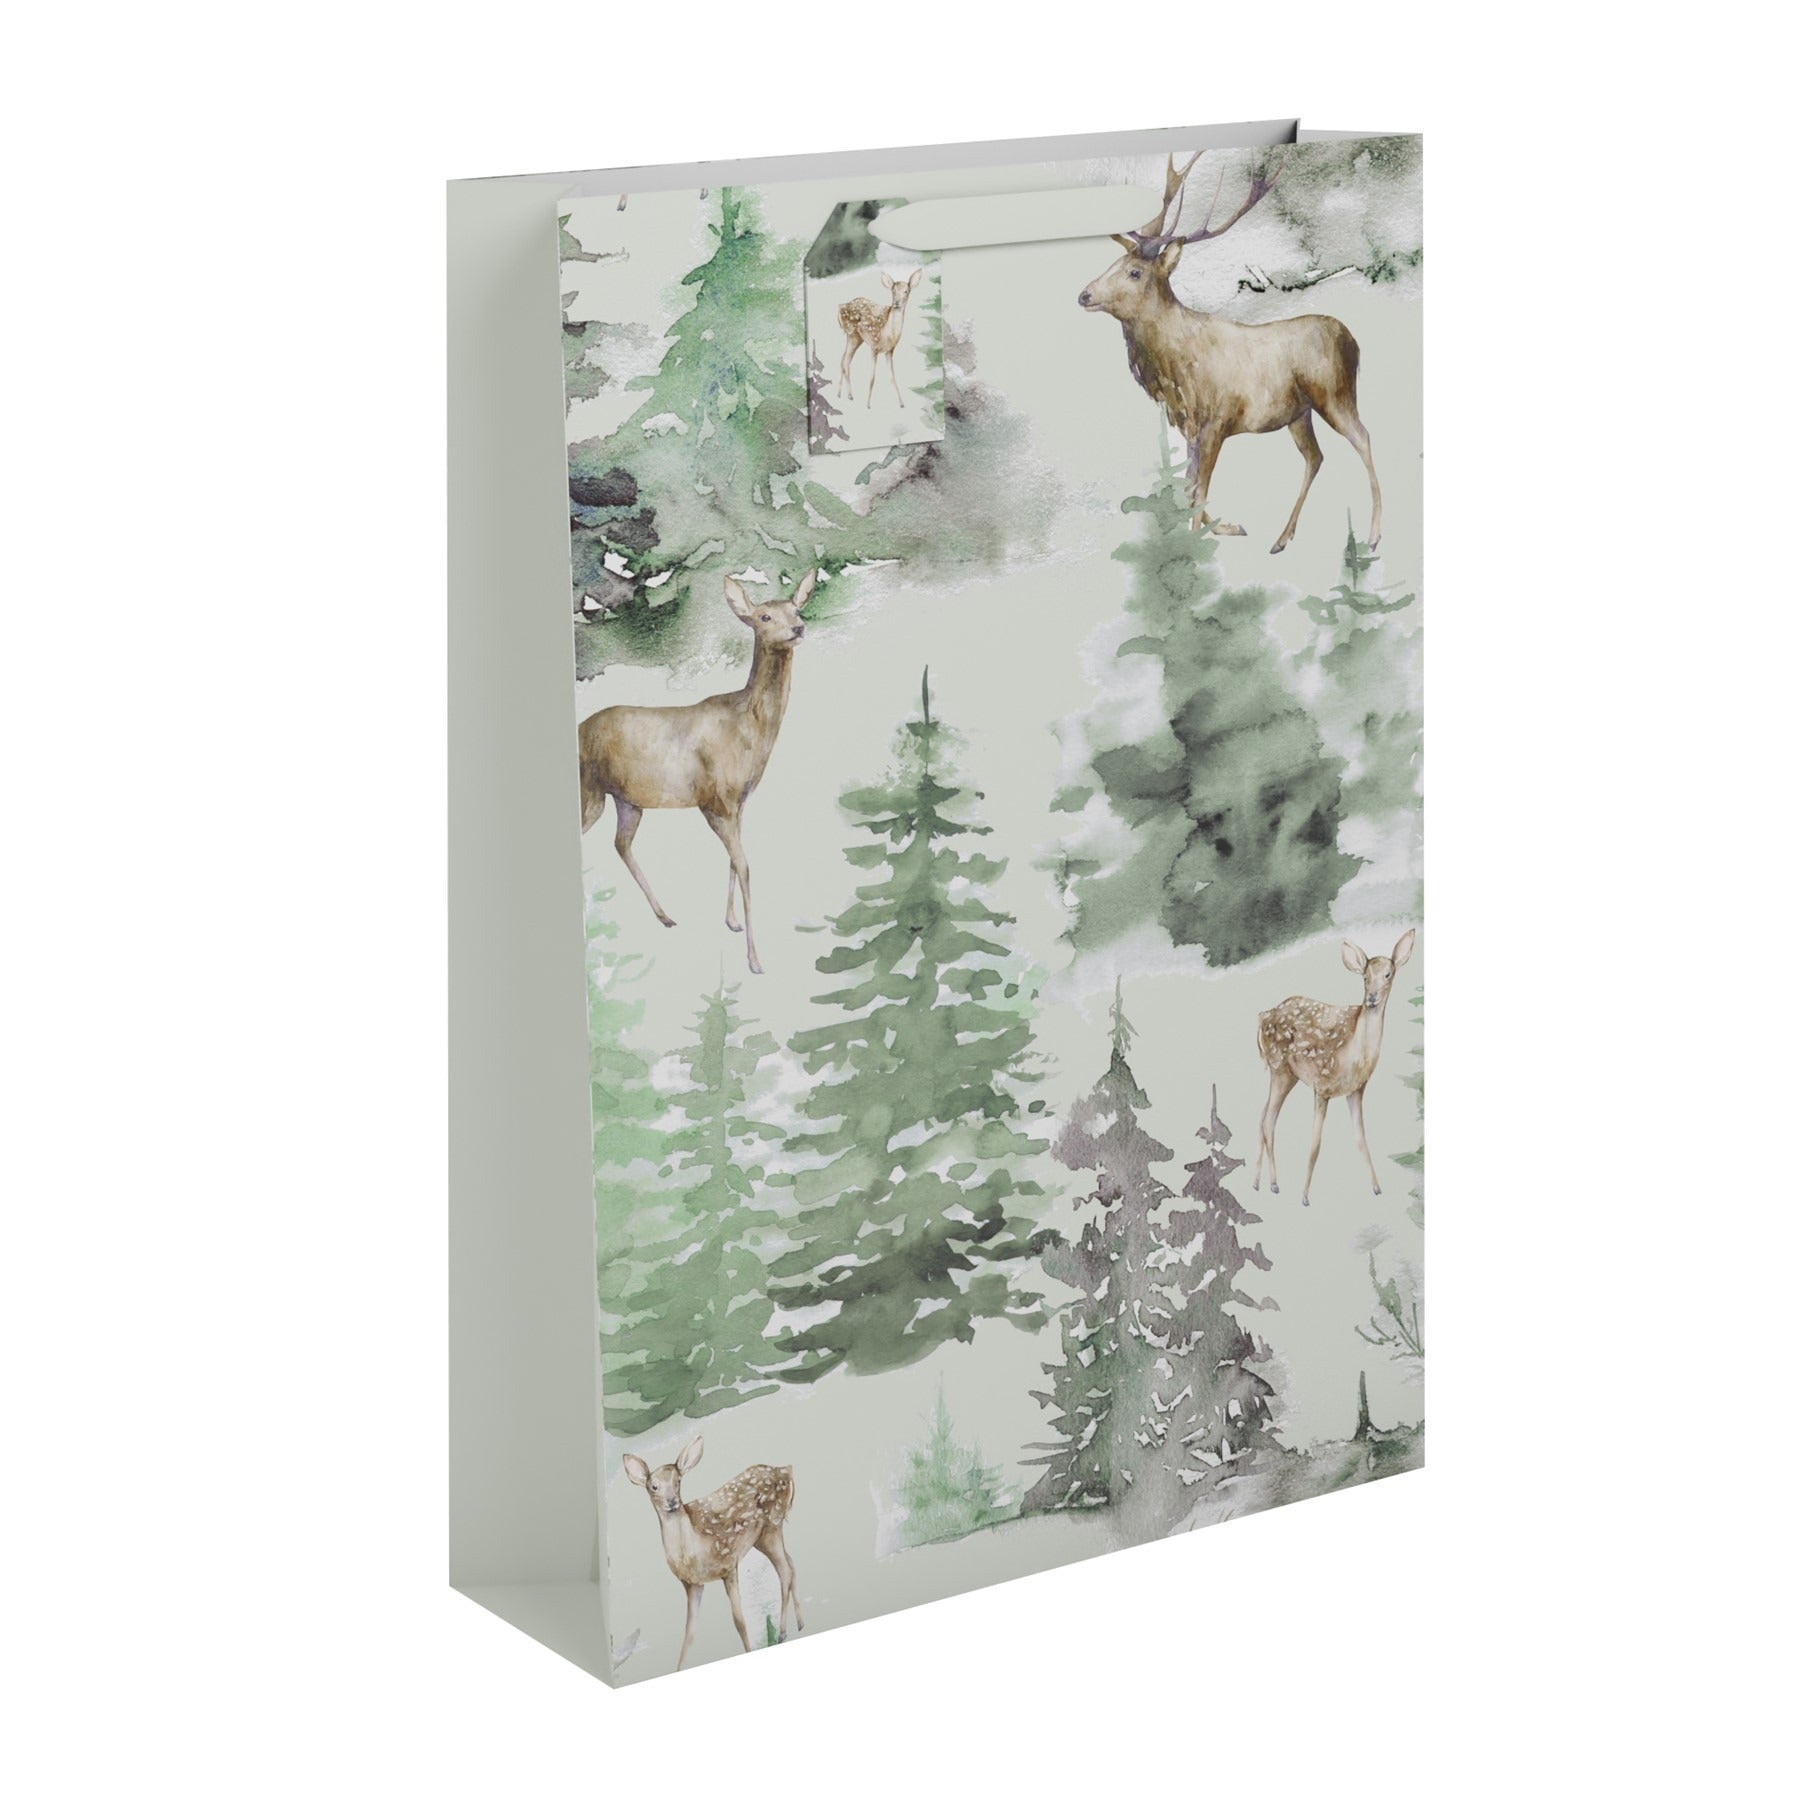 View Traditional Reindeer Gift Bag ExtraLarge information